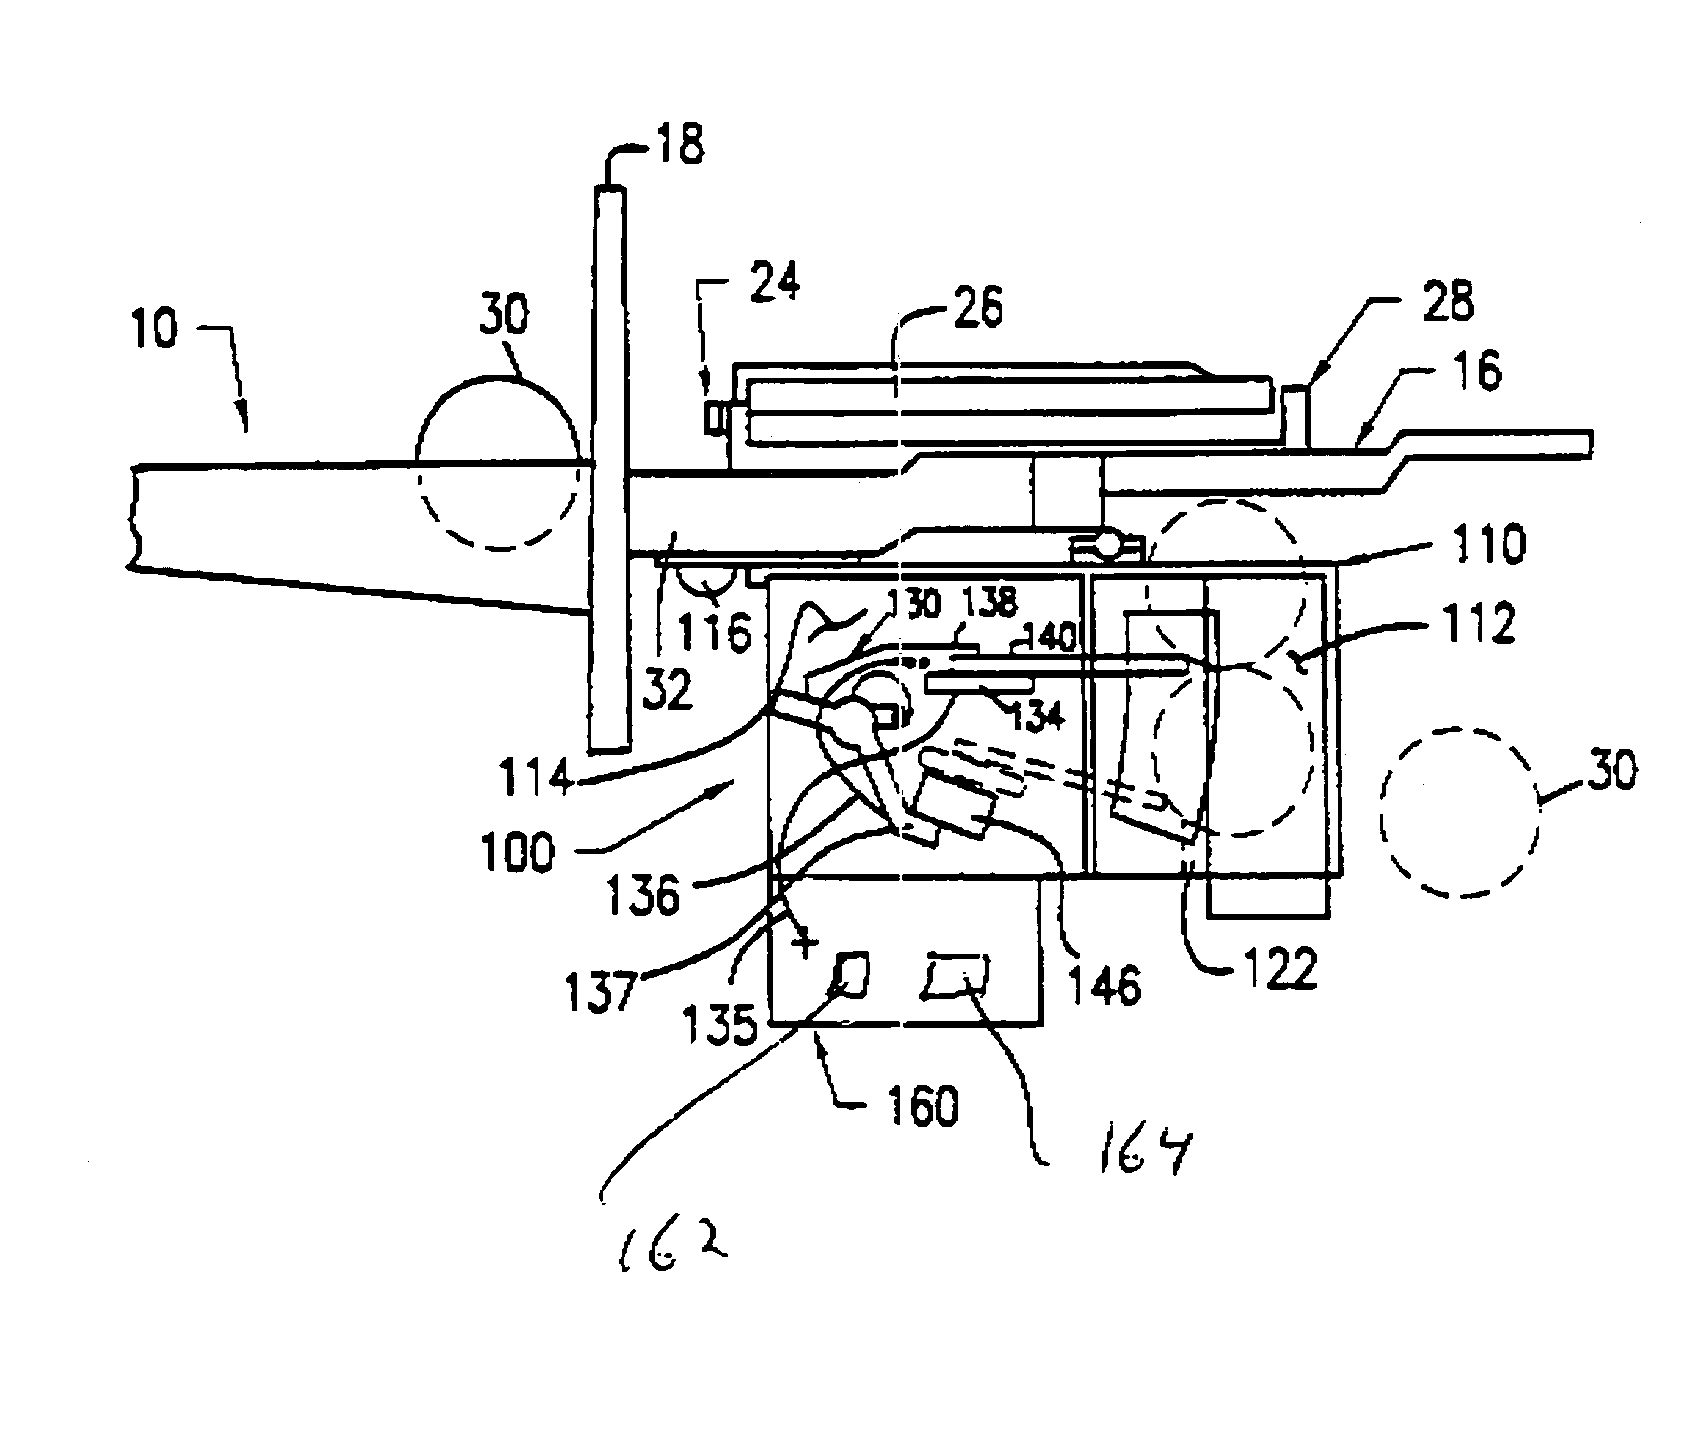 Data generating device for push pull coin mechanism for vending and arcade machines and appliances